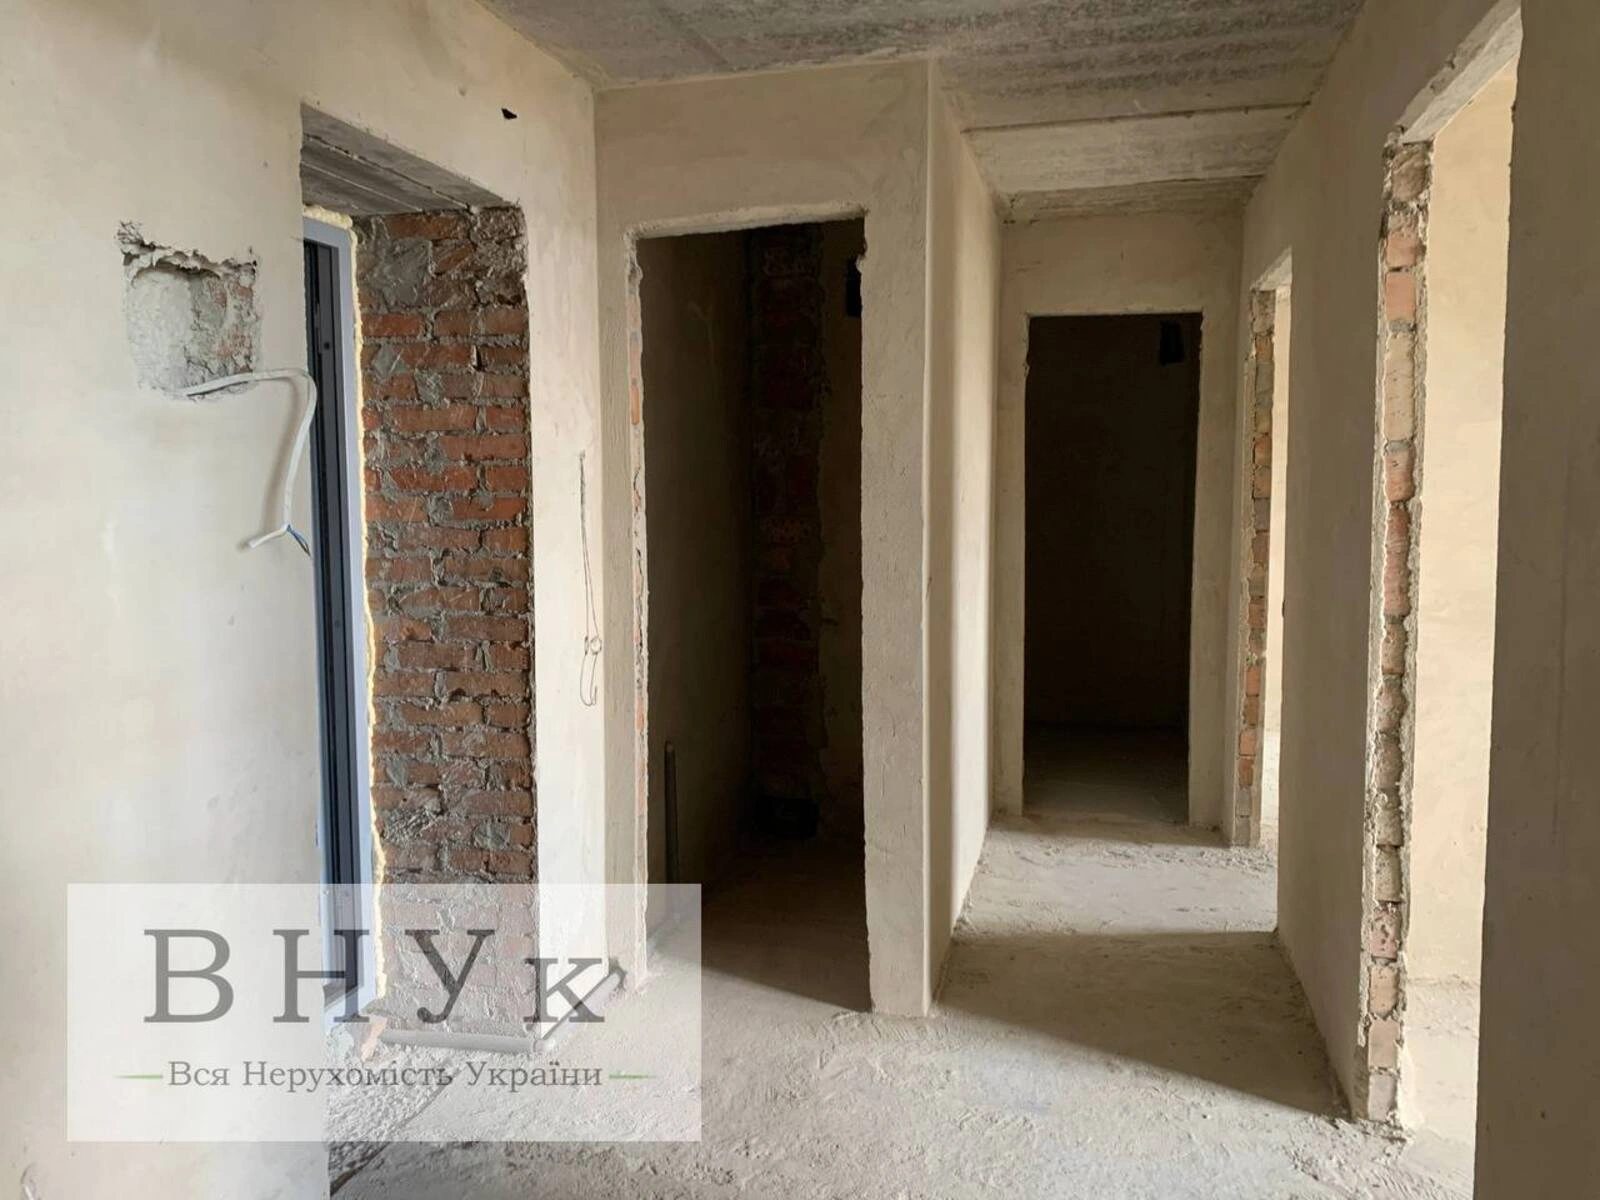 Apartments for sale. 2 rooms, 70 m², 6th floor/9 floors. Dovzhenka O. , Ternopil. 